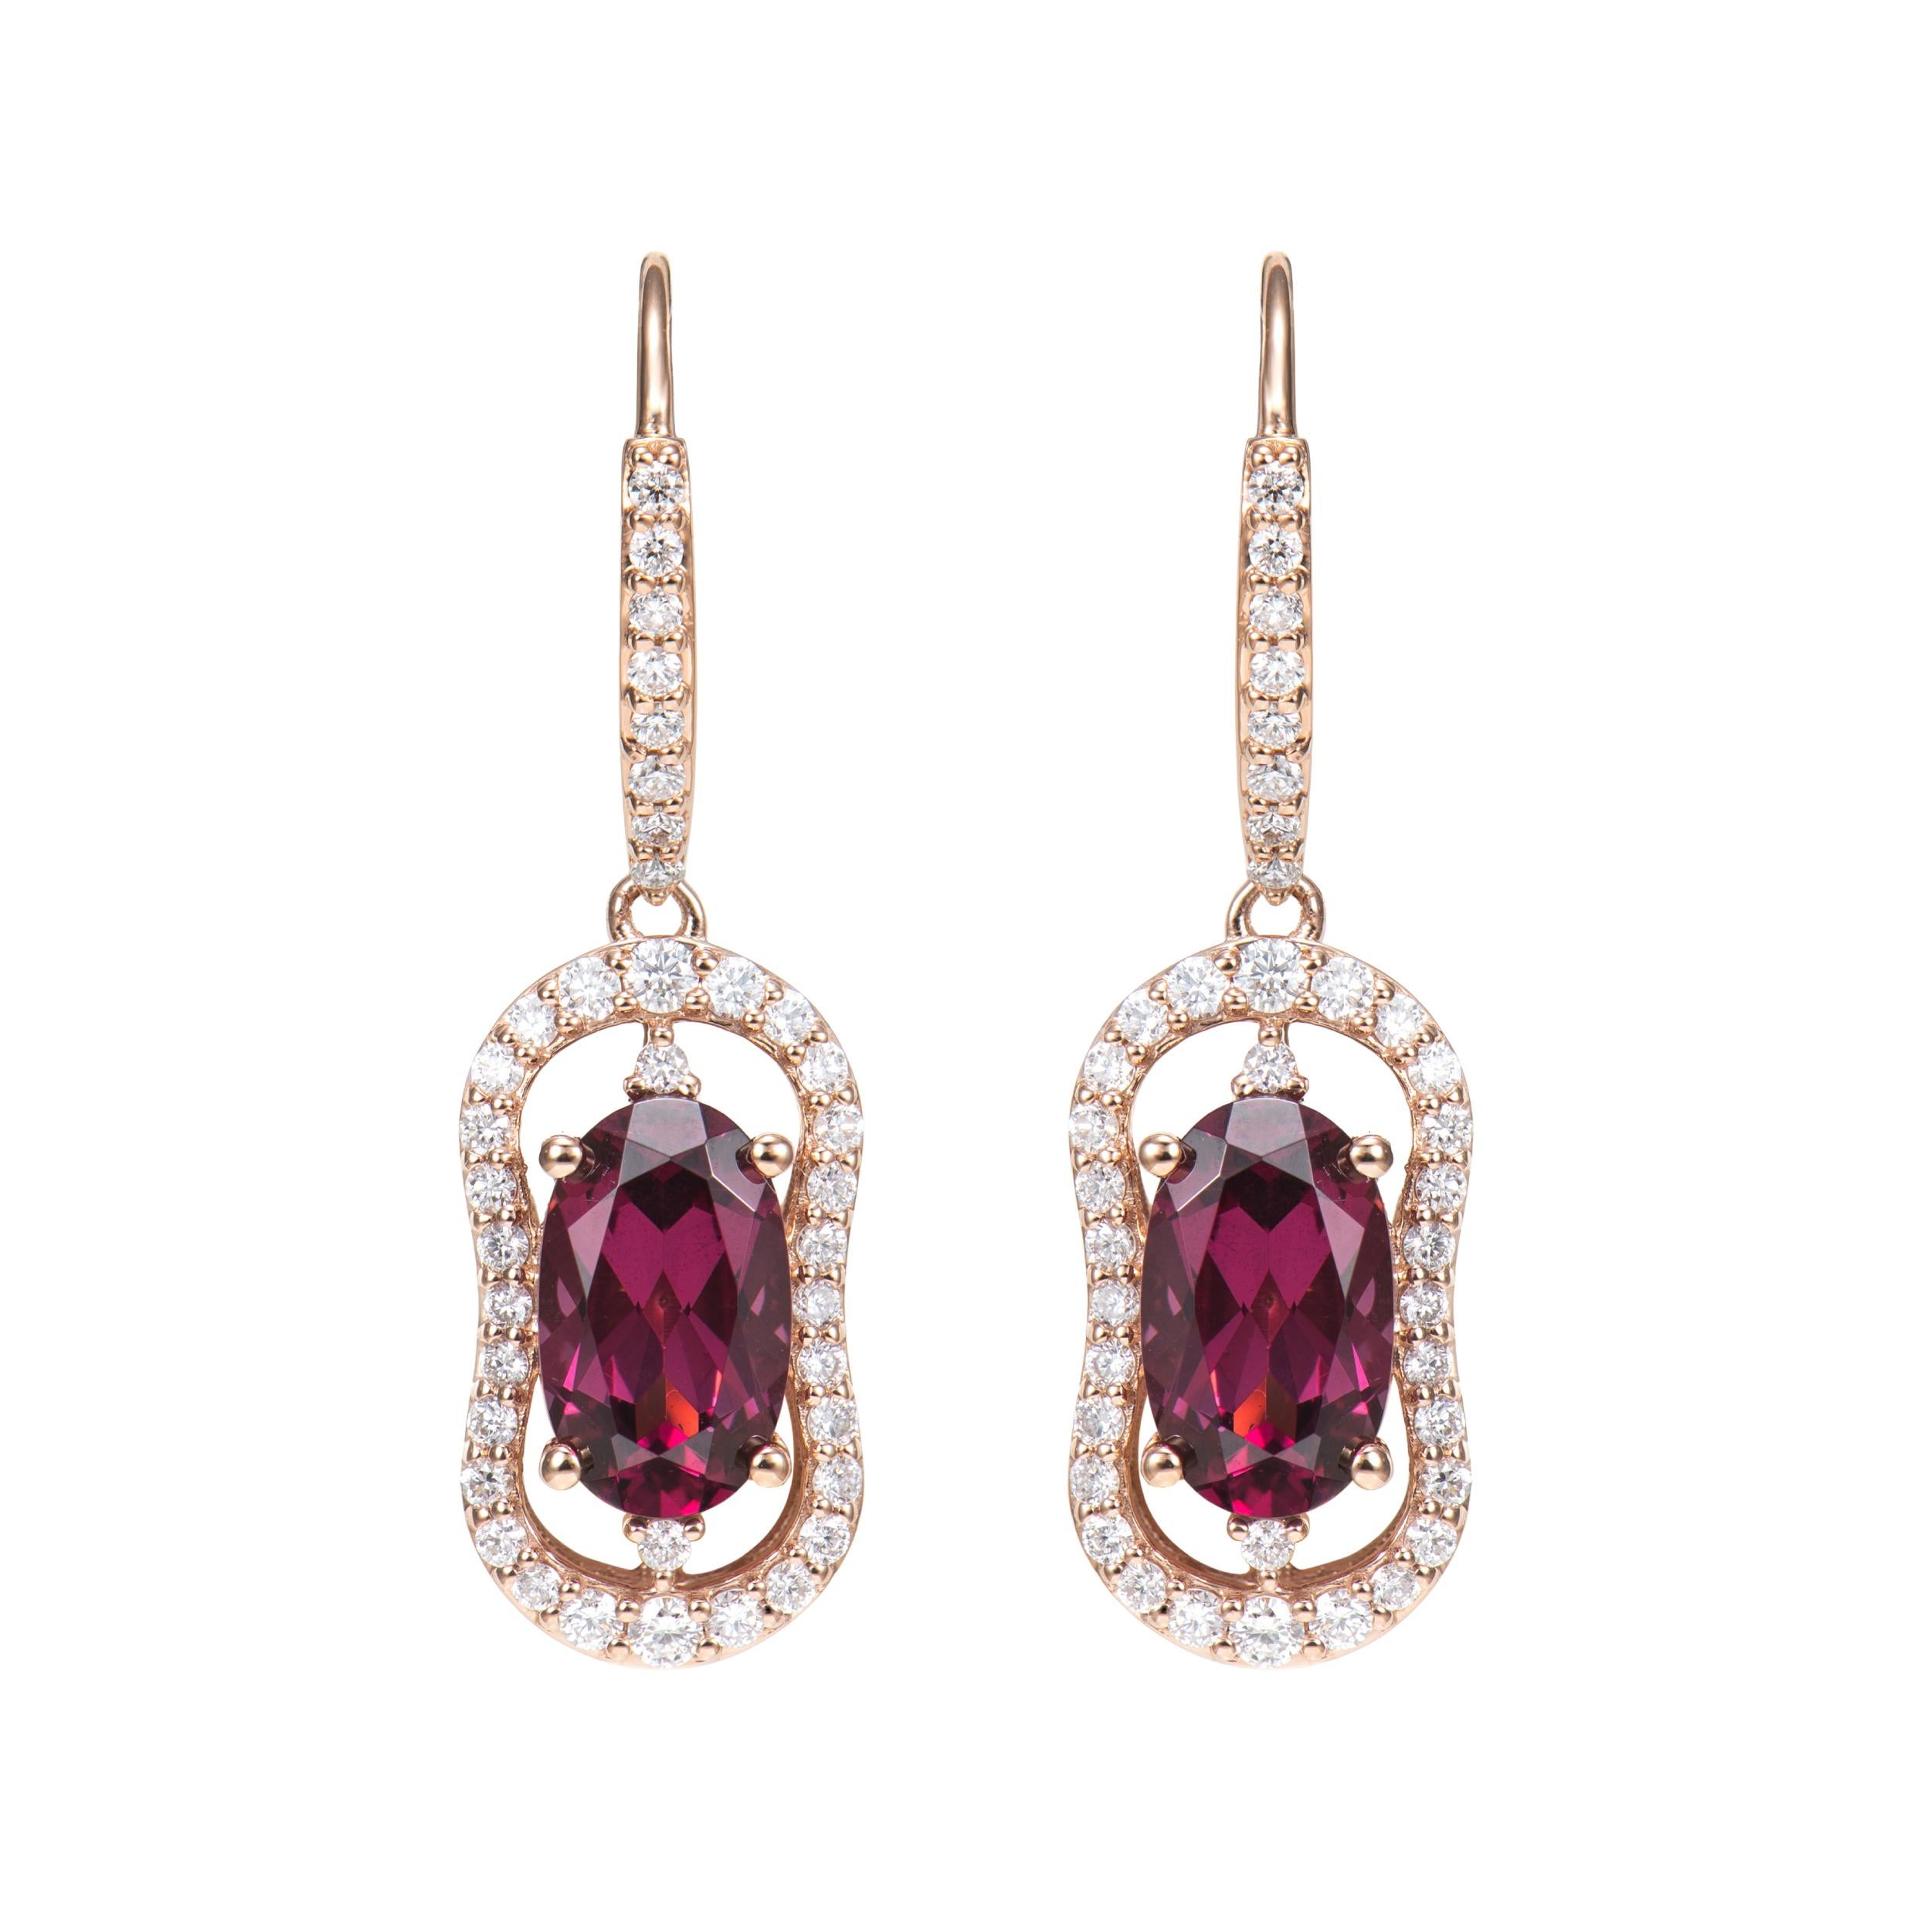 Contemporary 4.83 Carat Rhodolite Drop Earring in 18 Karat Rose Gold with White Diamond. For Sale